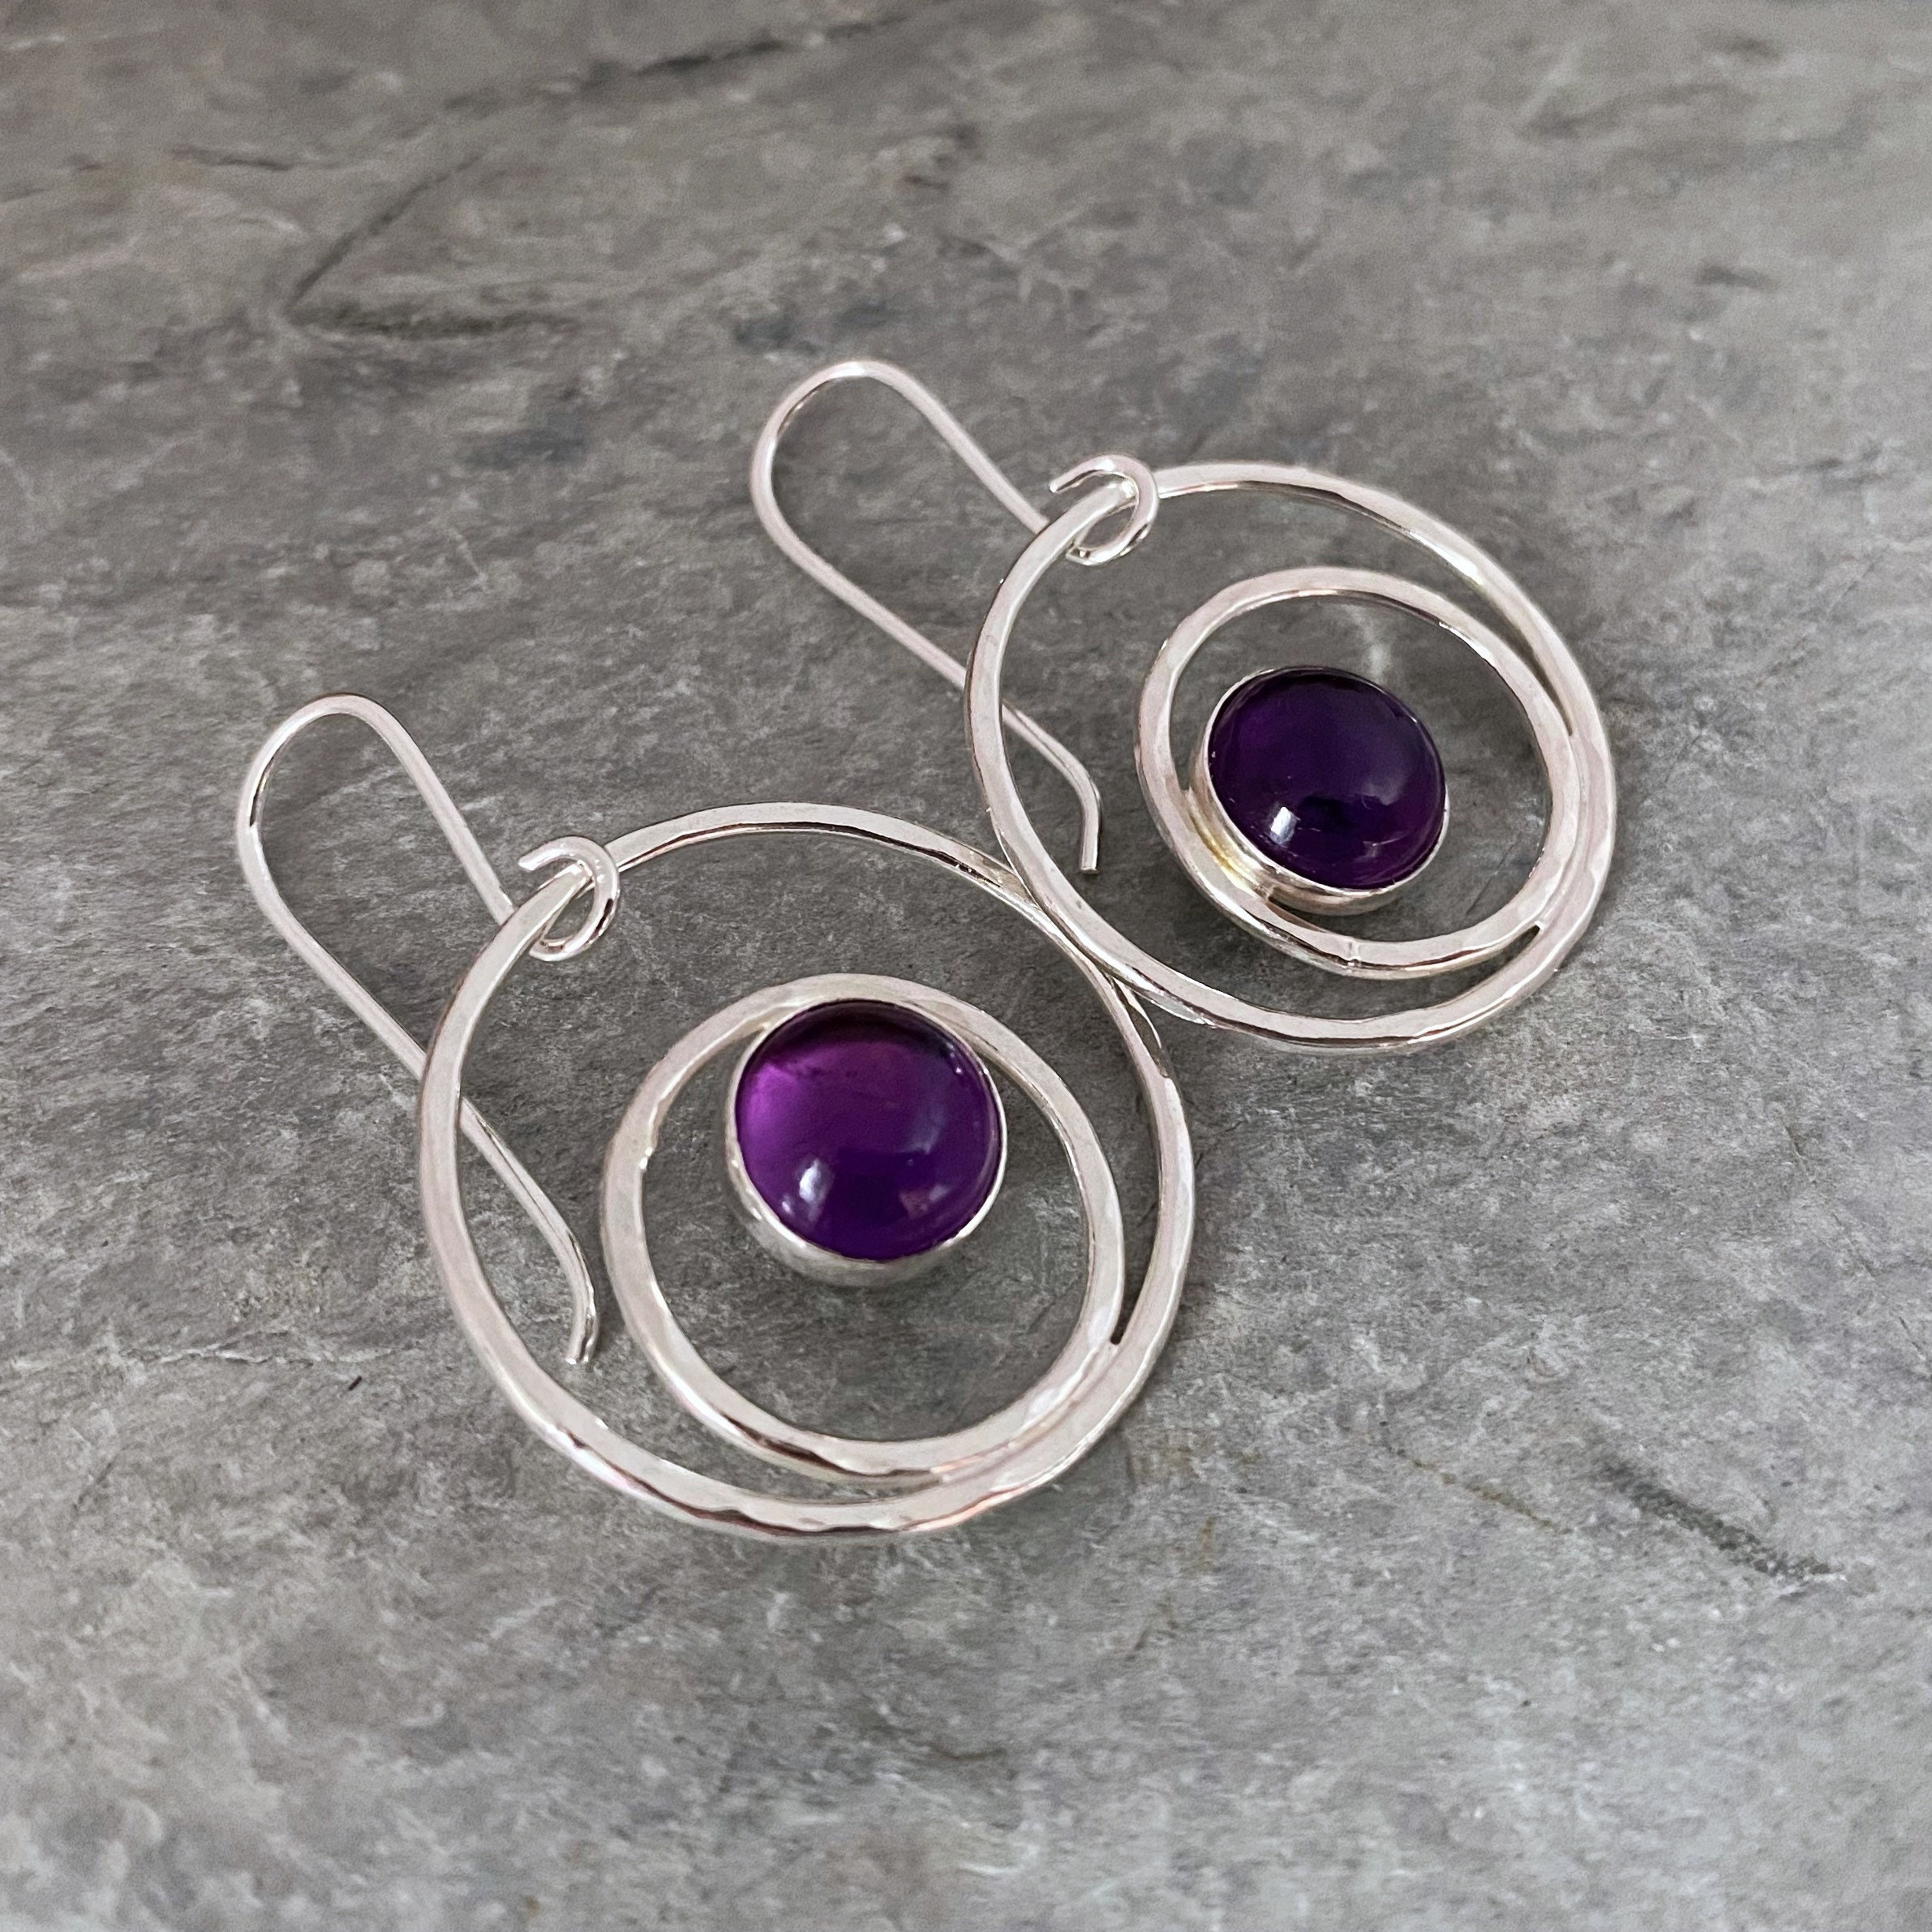 Round Silver Earrings With Amethyst Stones in The Centre, Hammered Hoop Earrings, Amethyst